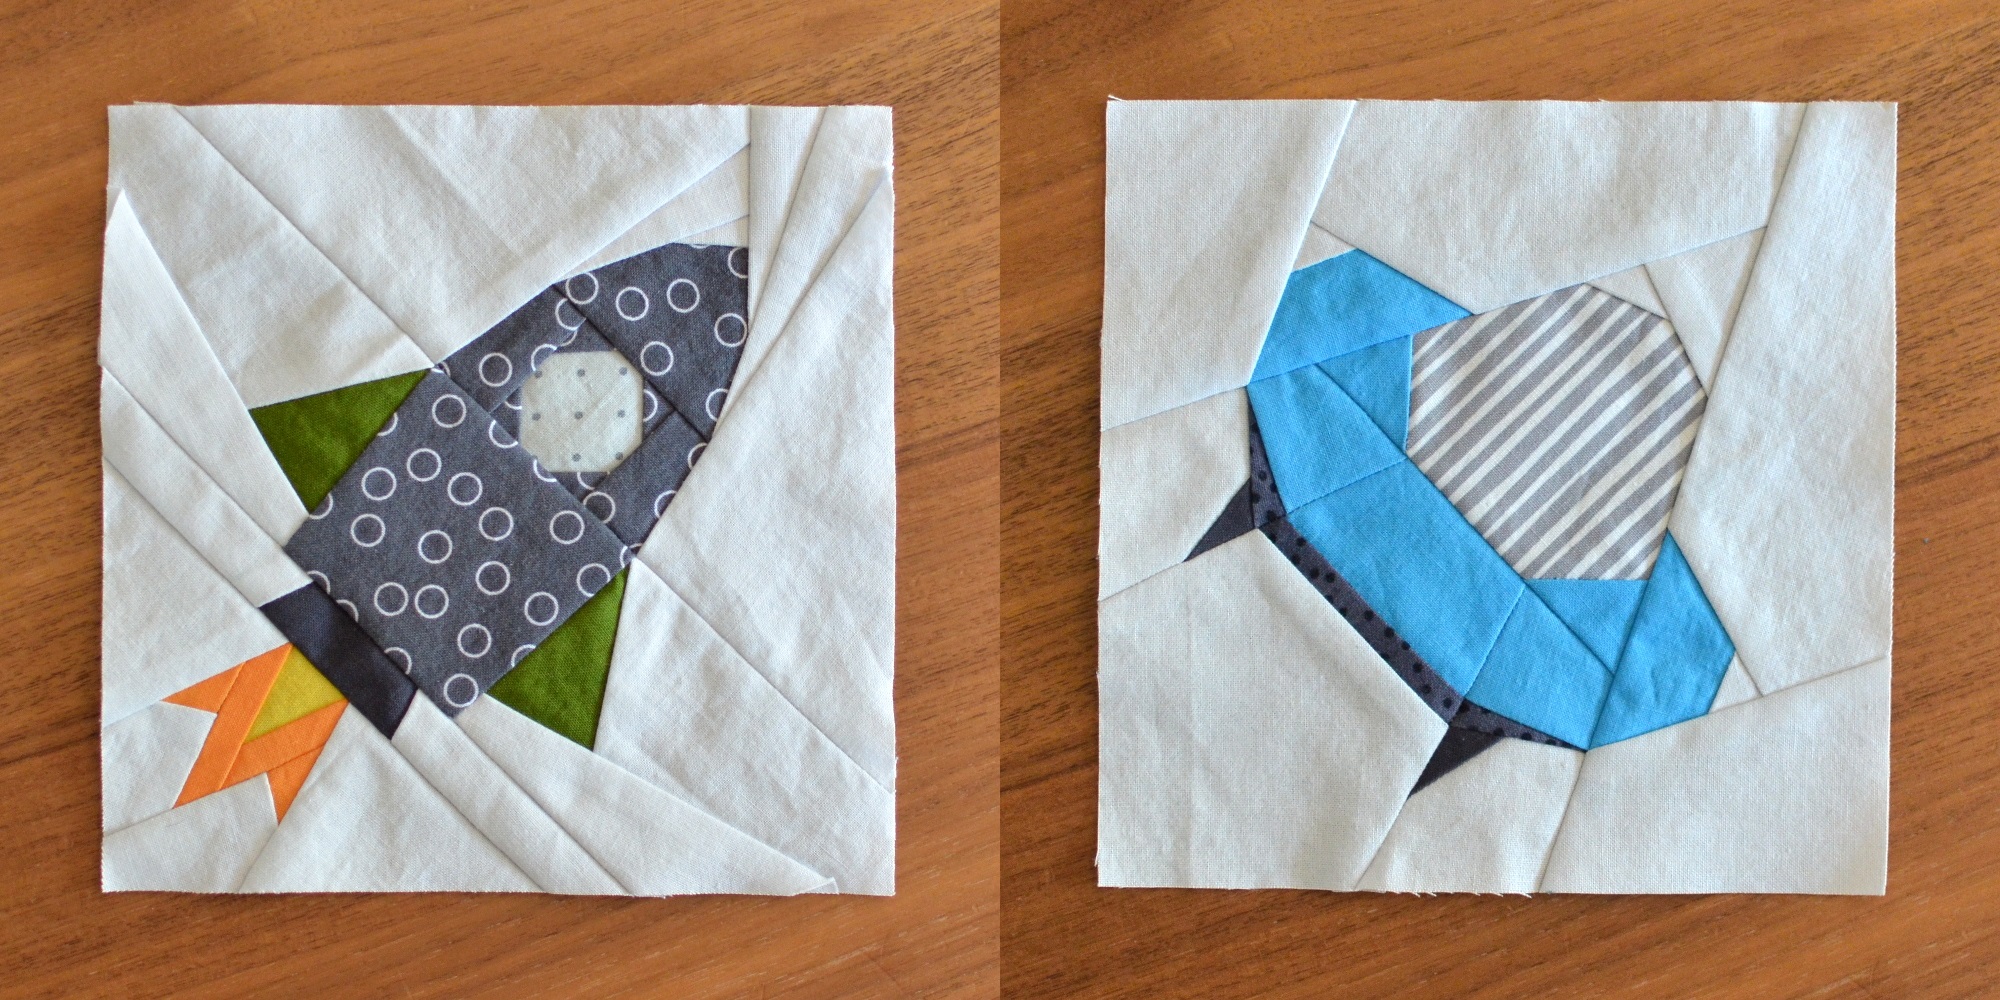 Y’s space quilt – a work in progress